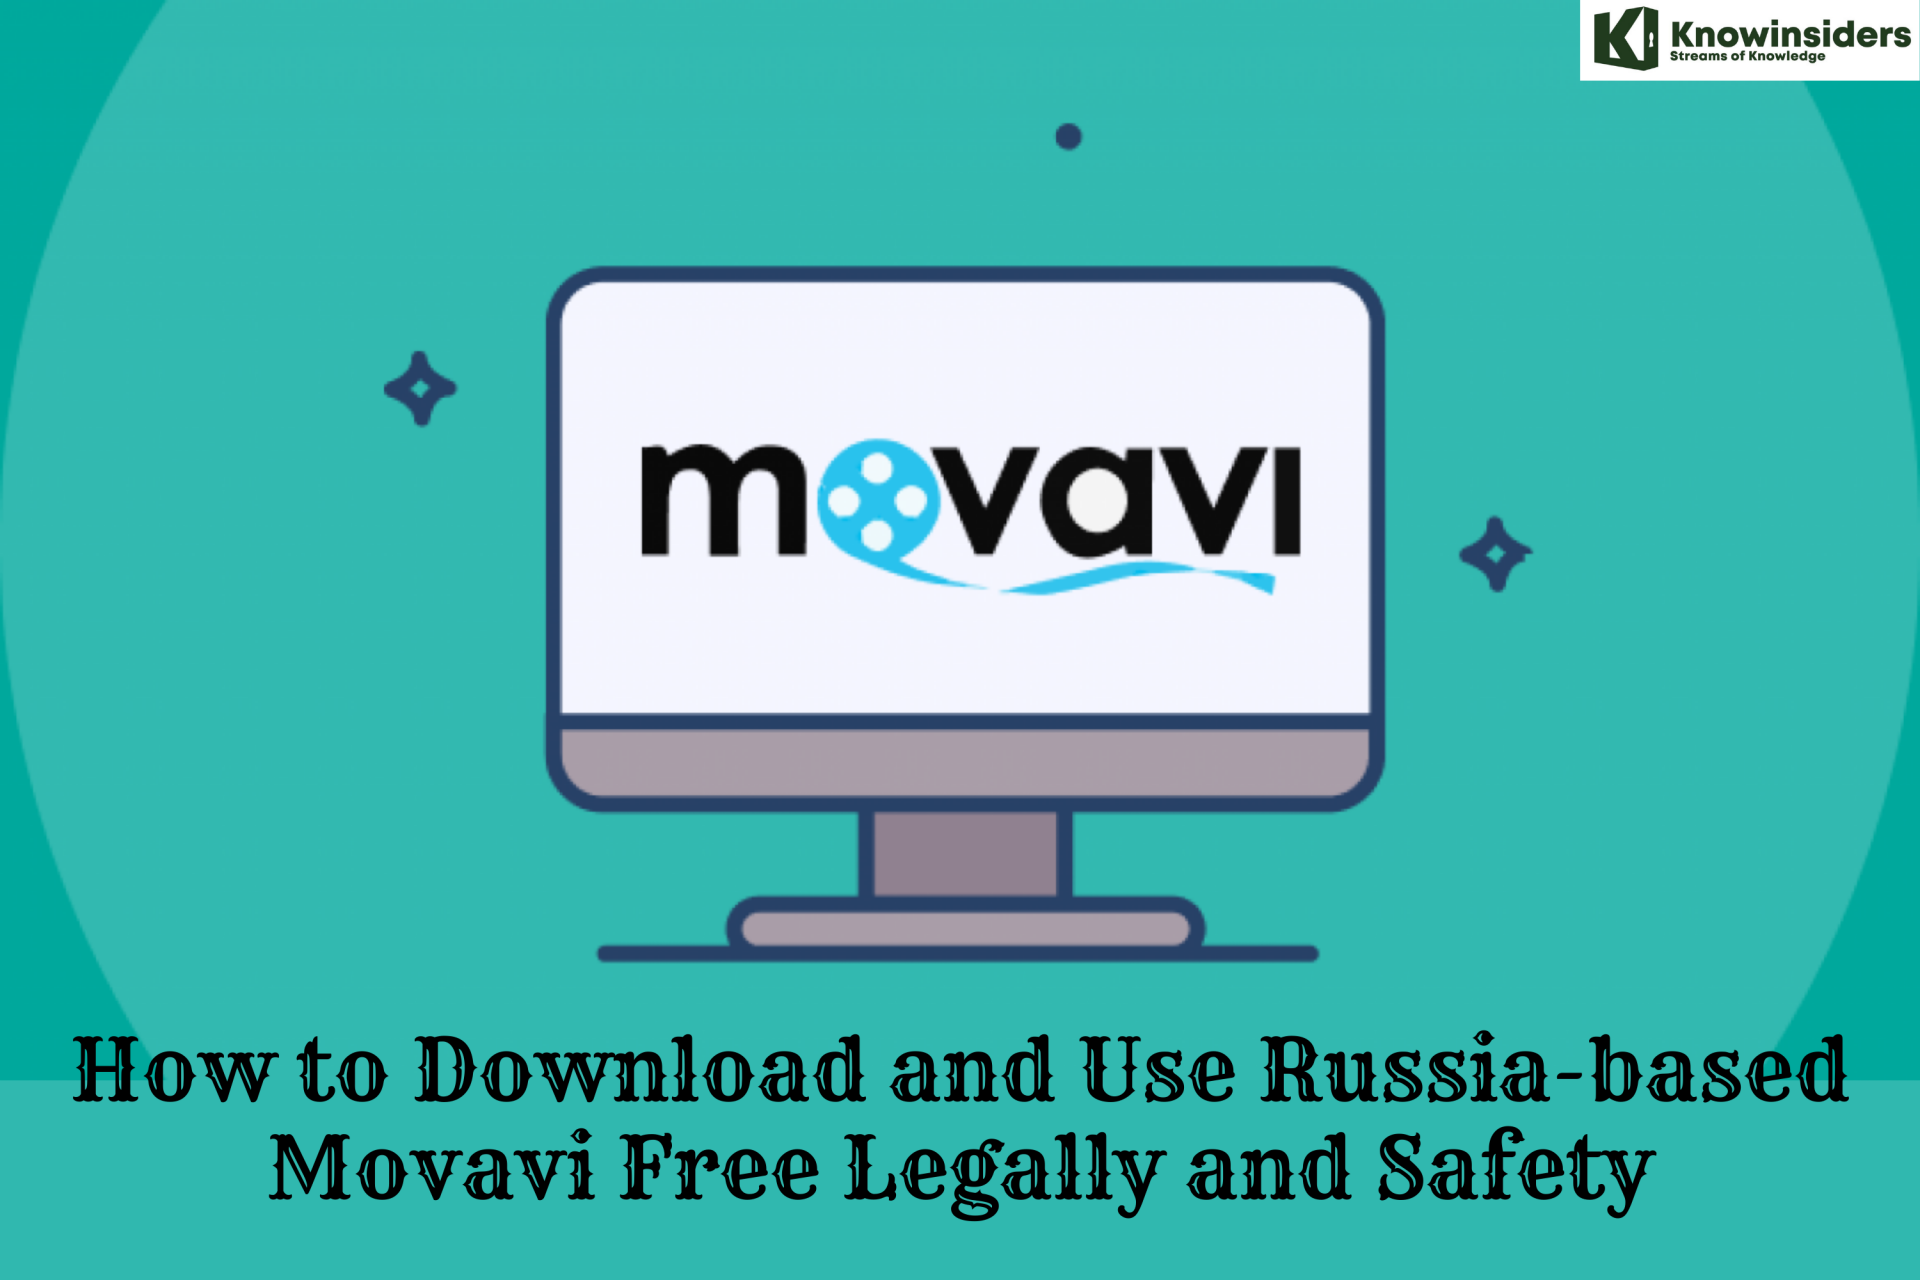 How to Download and Use Russia-based Movavi Free Legally and Safety